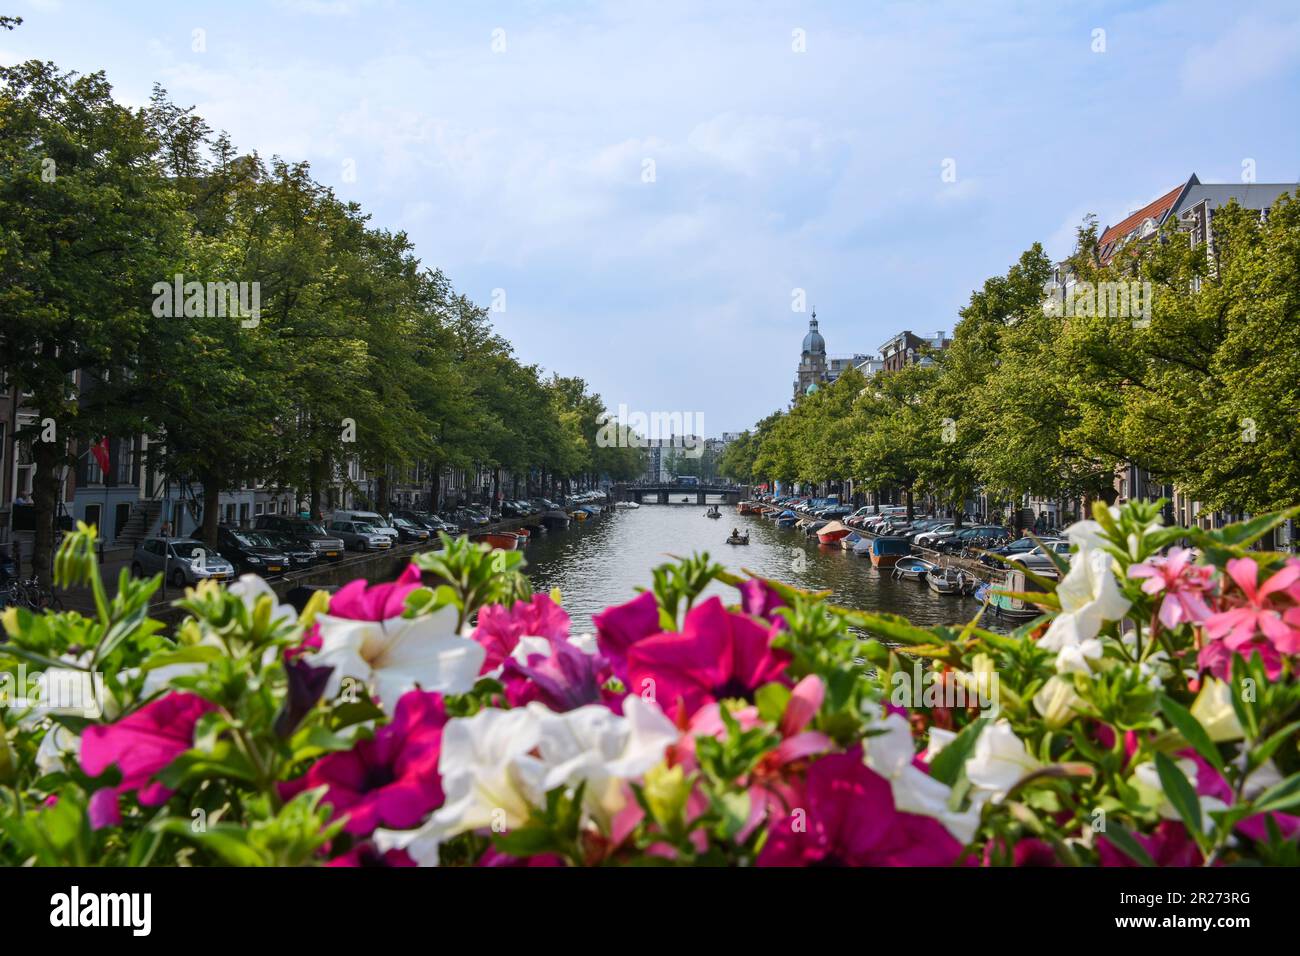 The Amstel River on a Flowerbed - Amsterdam, Netherlands Stock Photo